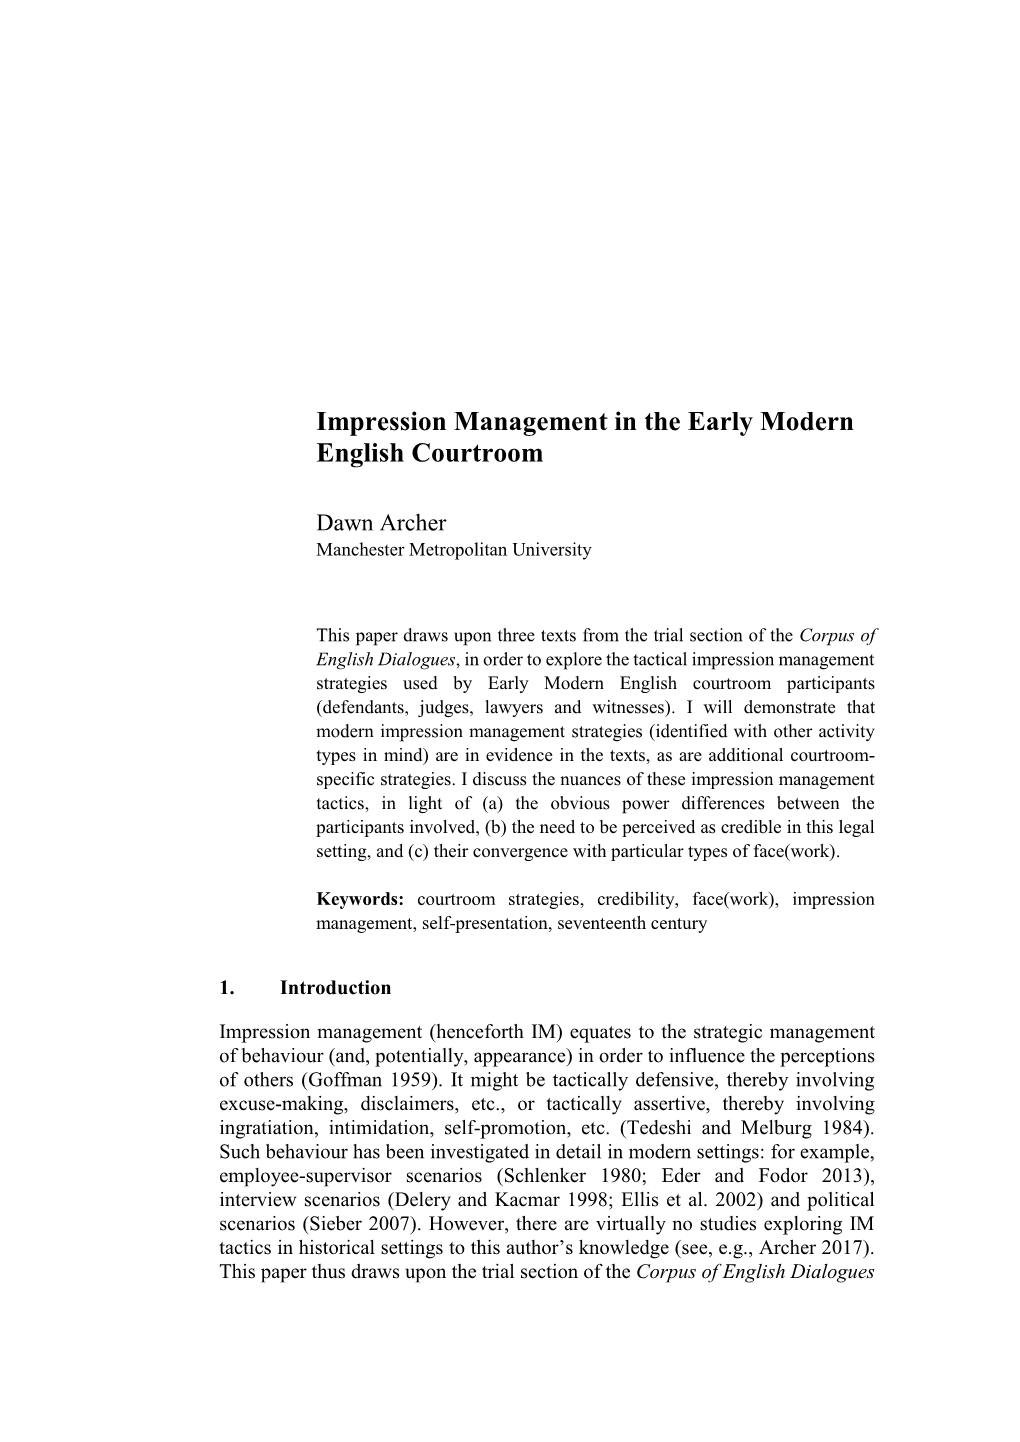 Impression Management in the Early Modern English Courtroom